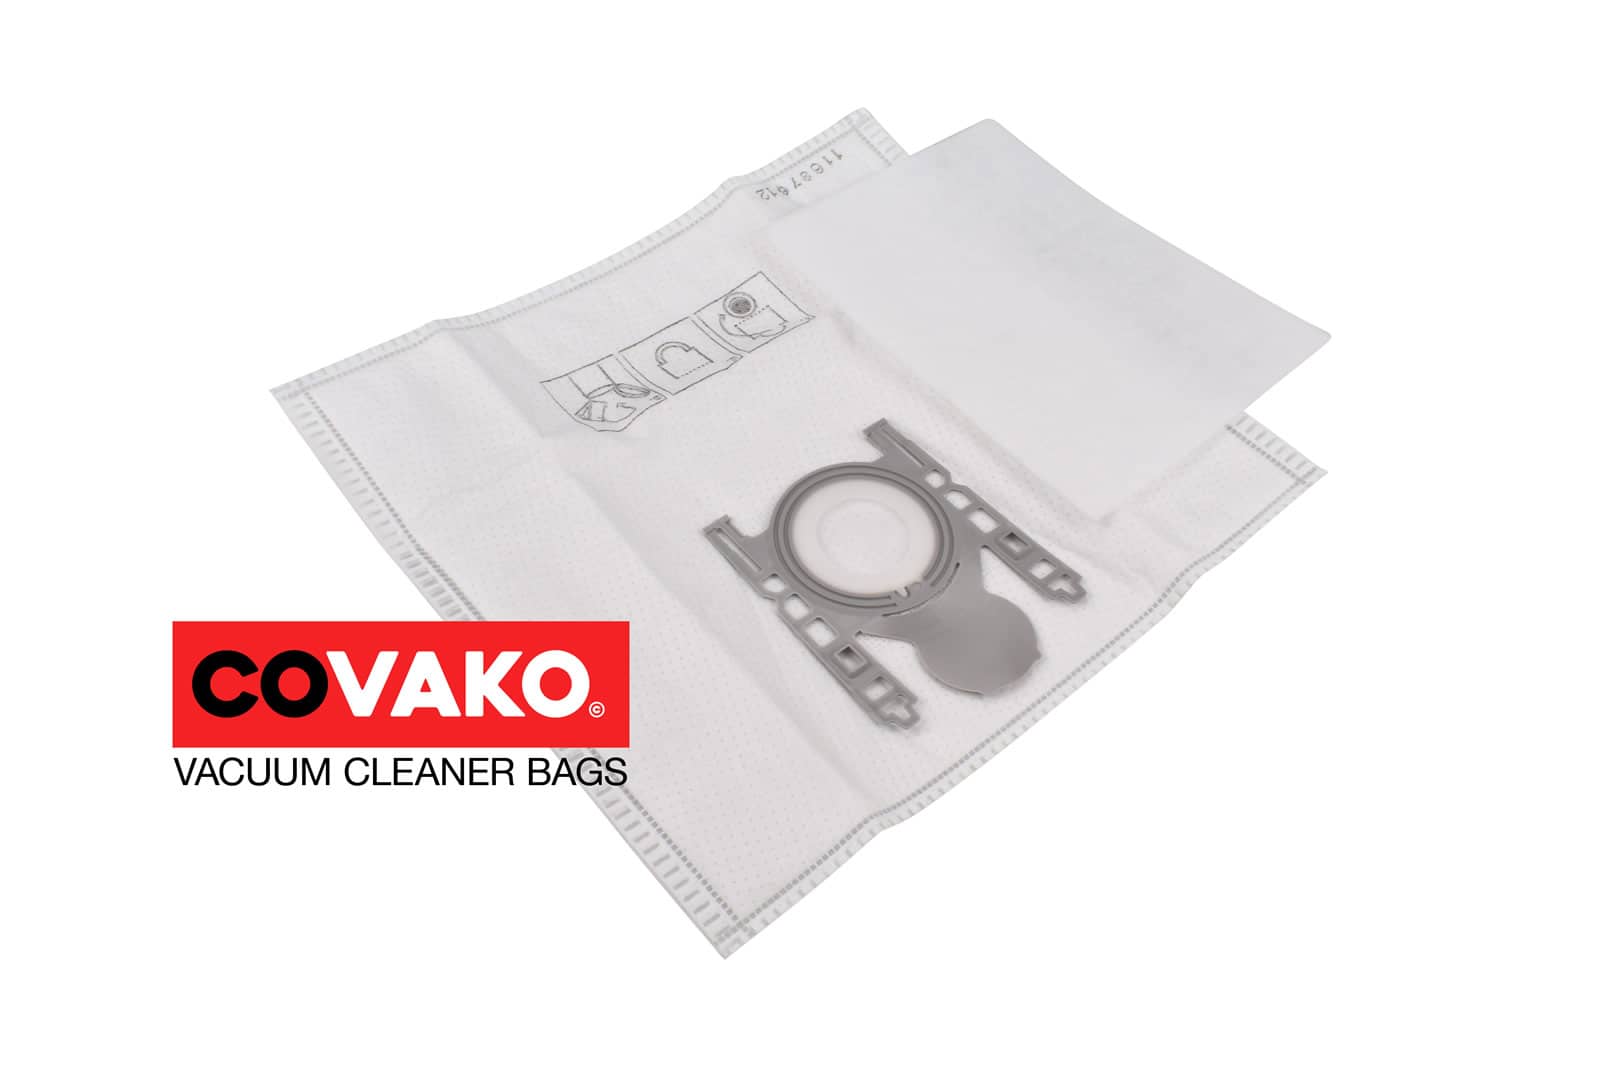 Bosch BBS 5000-5999 / Synthesis - Bosch vacuum cleaner bags